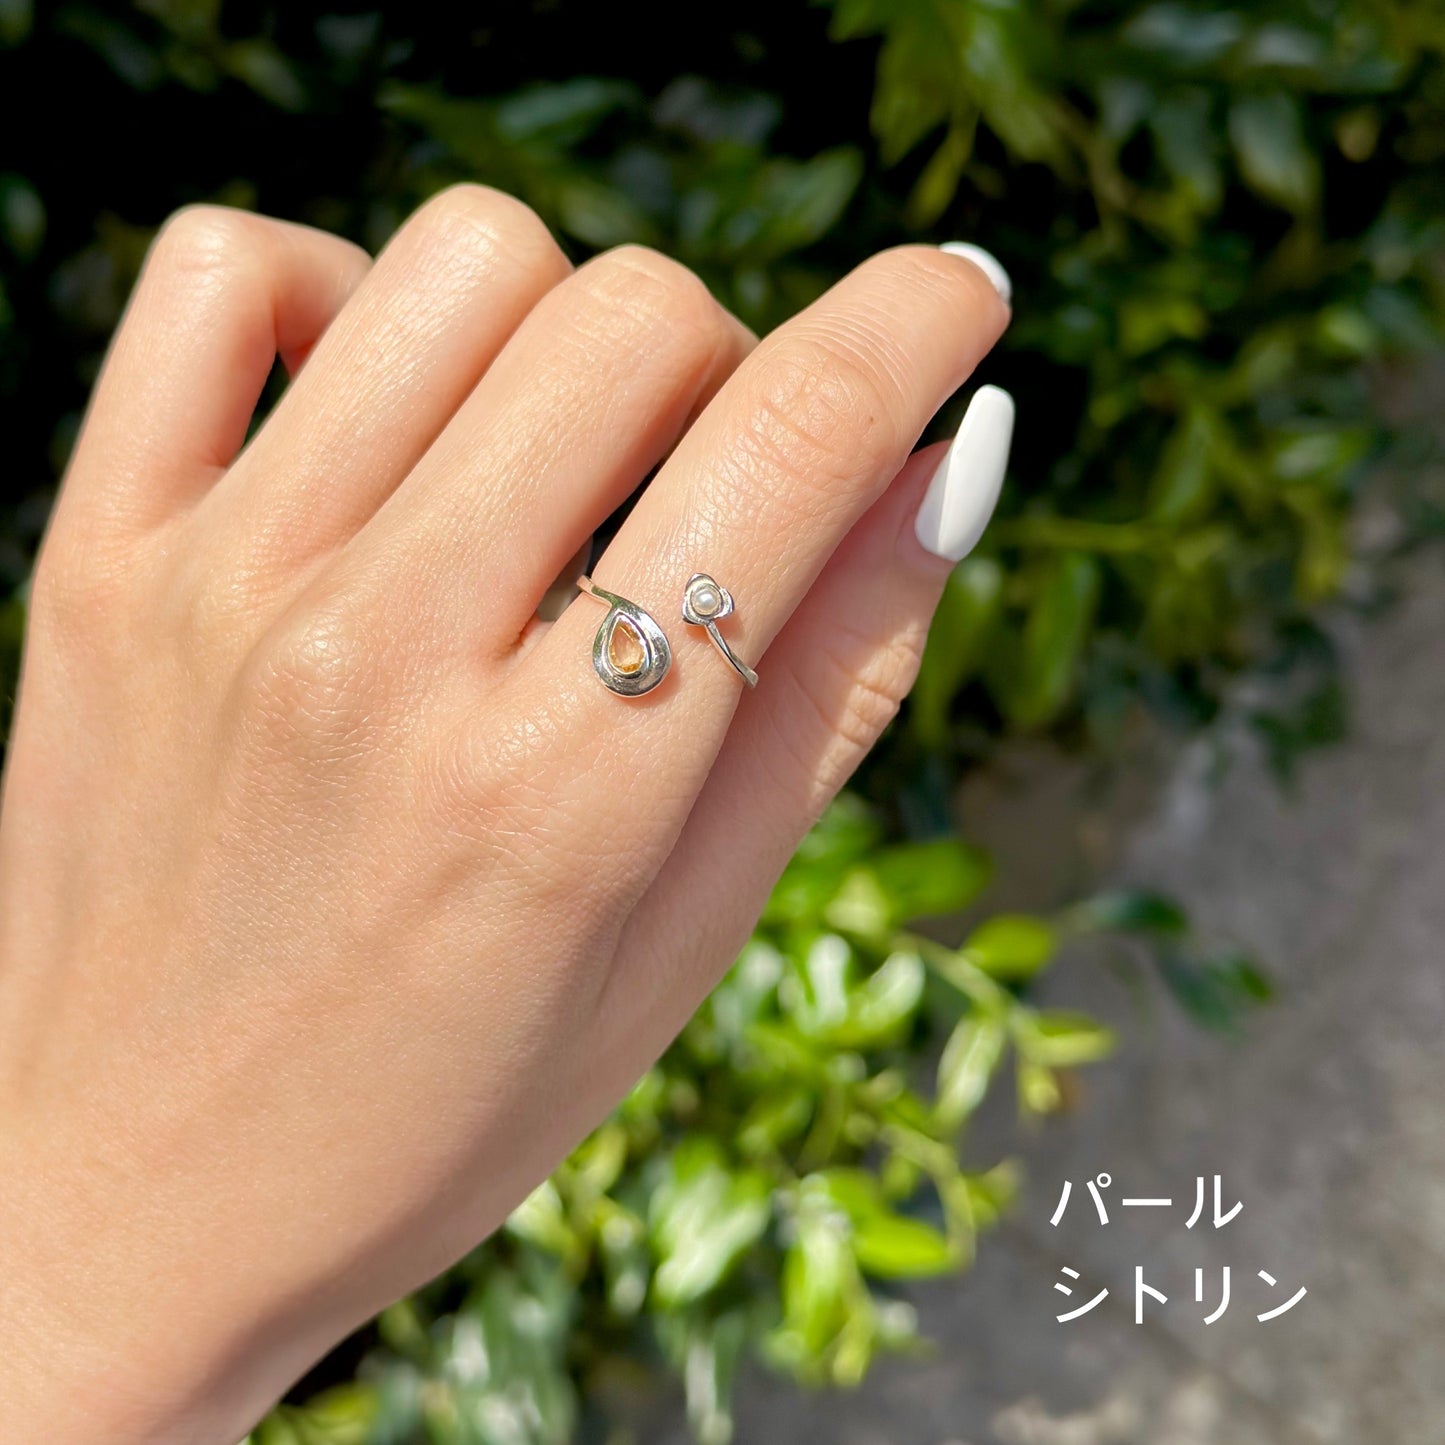 Silver925 2stone ring 3